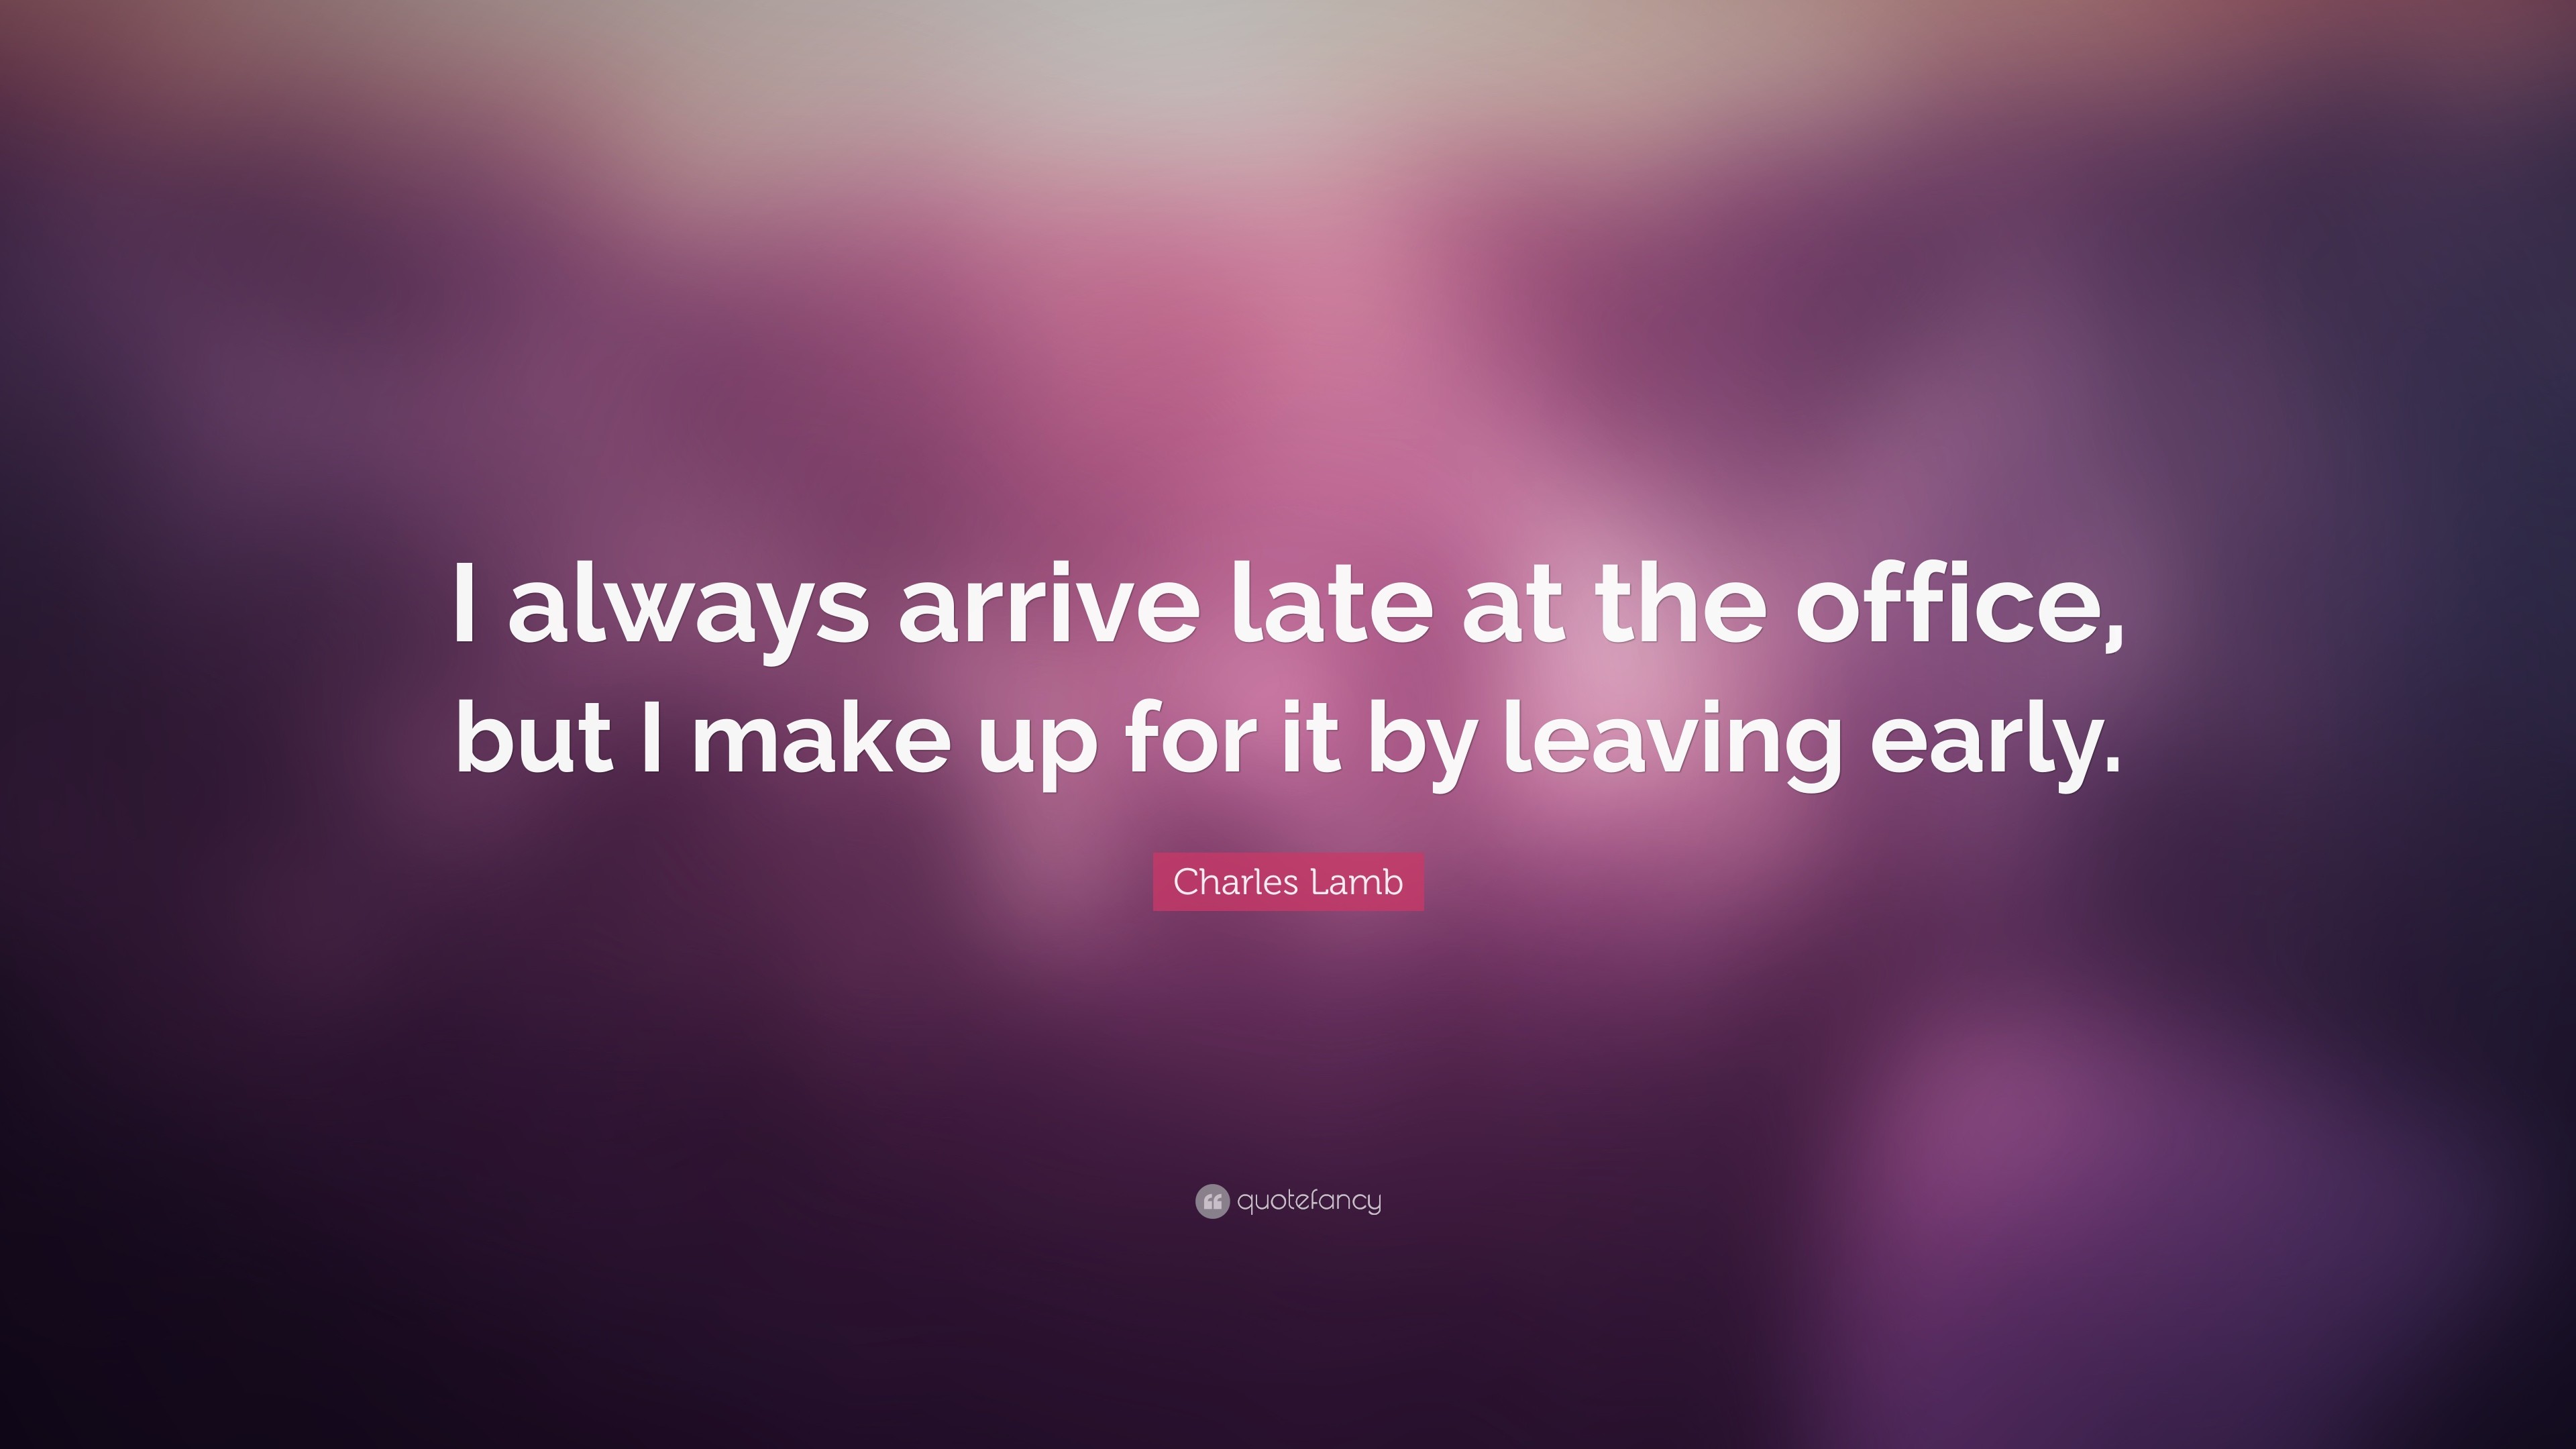 3840x2160 Charles Lamb Quote: “I always arrive late at the office, but I make